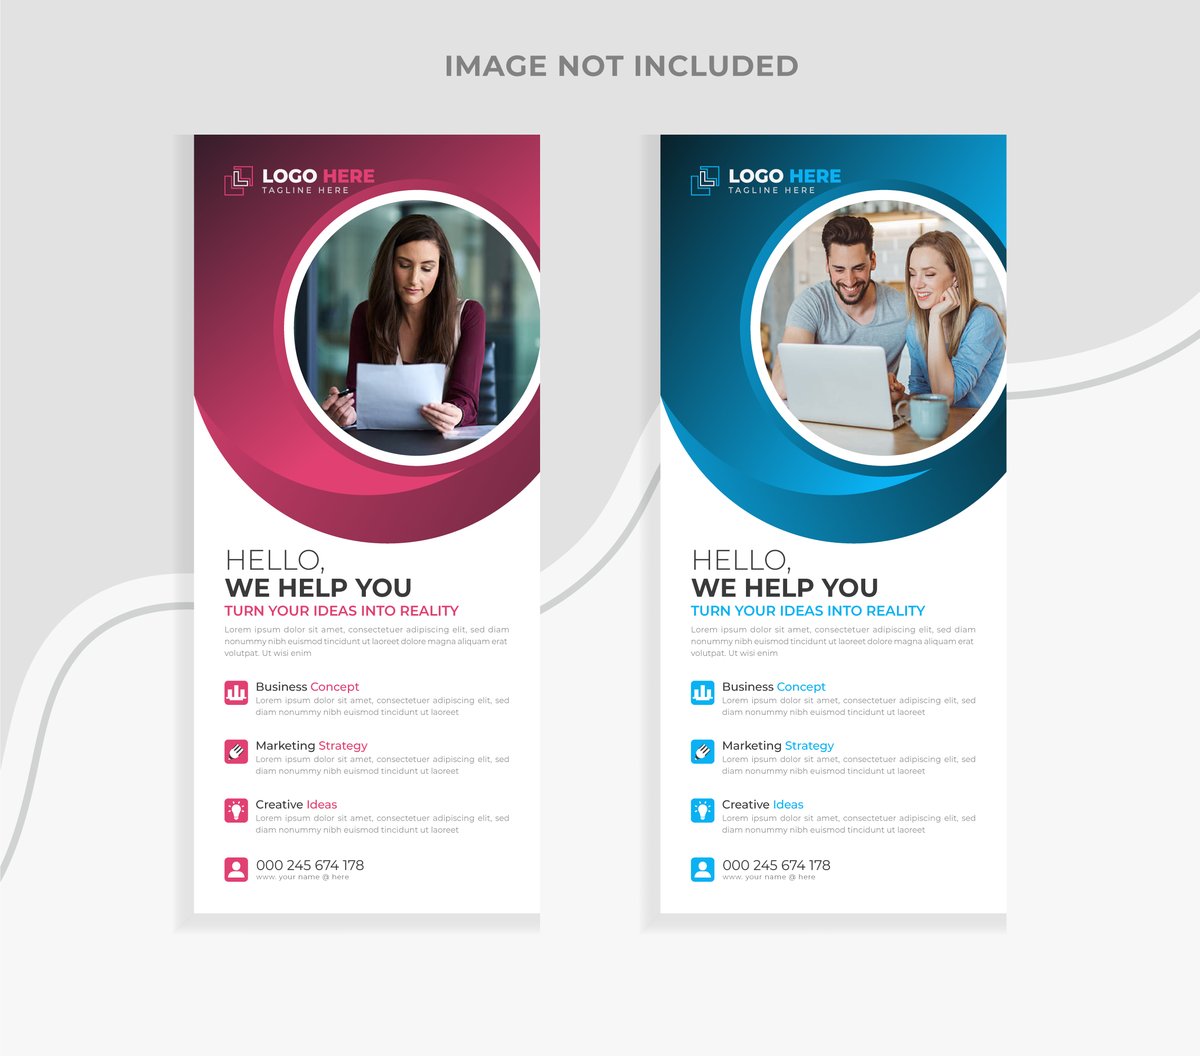 Abstract stylish corporate dl flyer rack card template

#dlflyer #Stylish #Abstract #business #Creative #Flyers #corporate #minimalist #banner #rackcard #posters #Marketing #DigitalMarketing #post  #layout #clean #simple #Agency #minimalism #print #Professional #Template #design